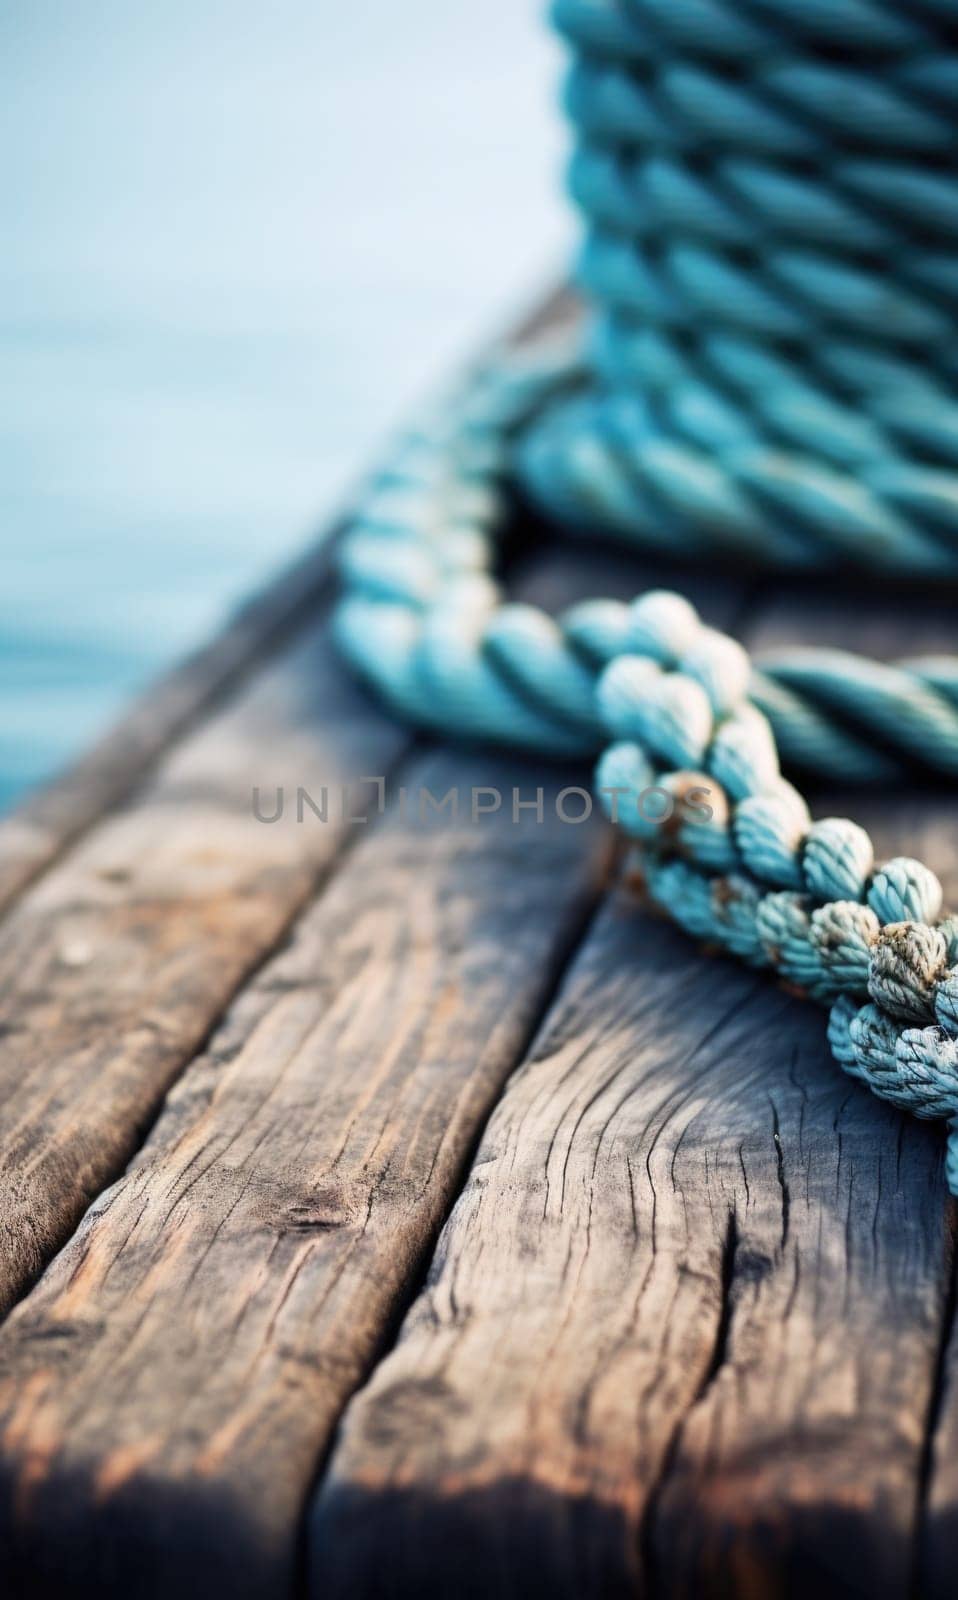 Rope on wooden dock with water in background, AI by starush